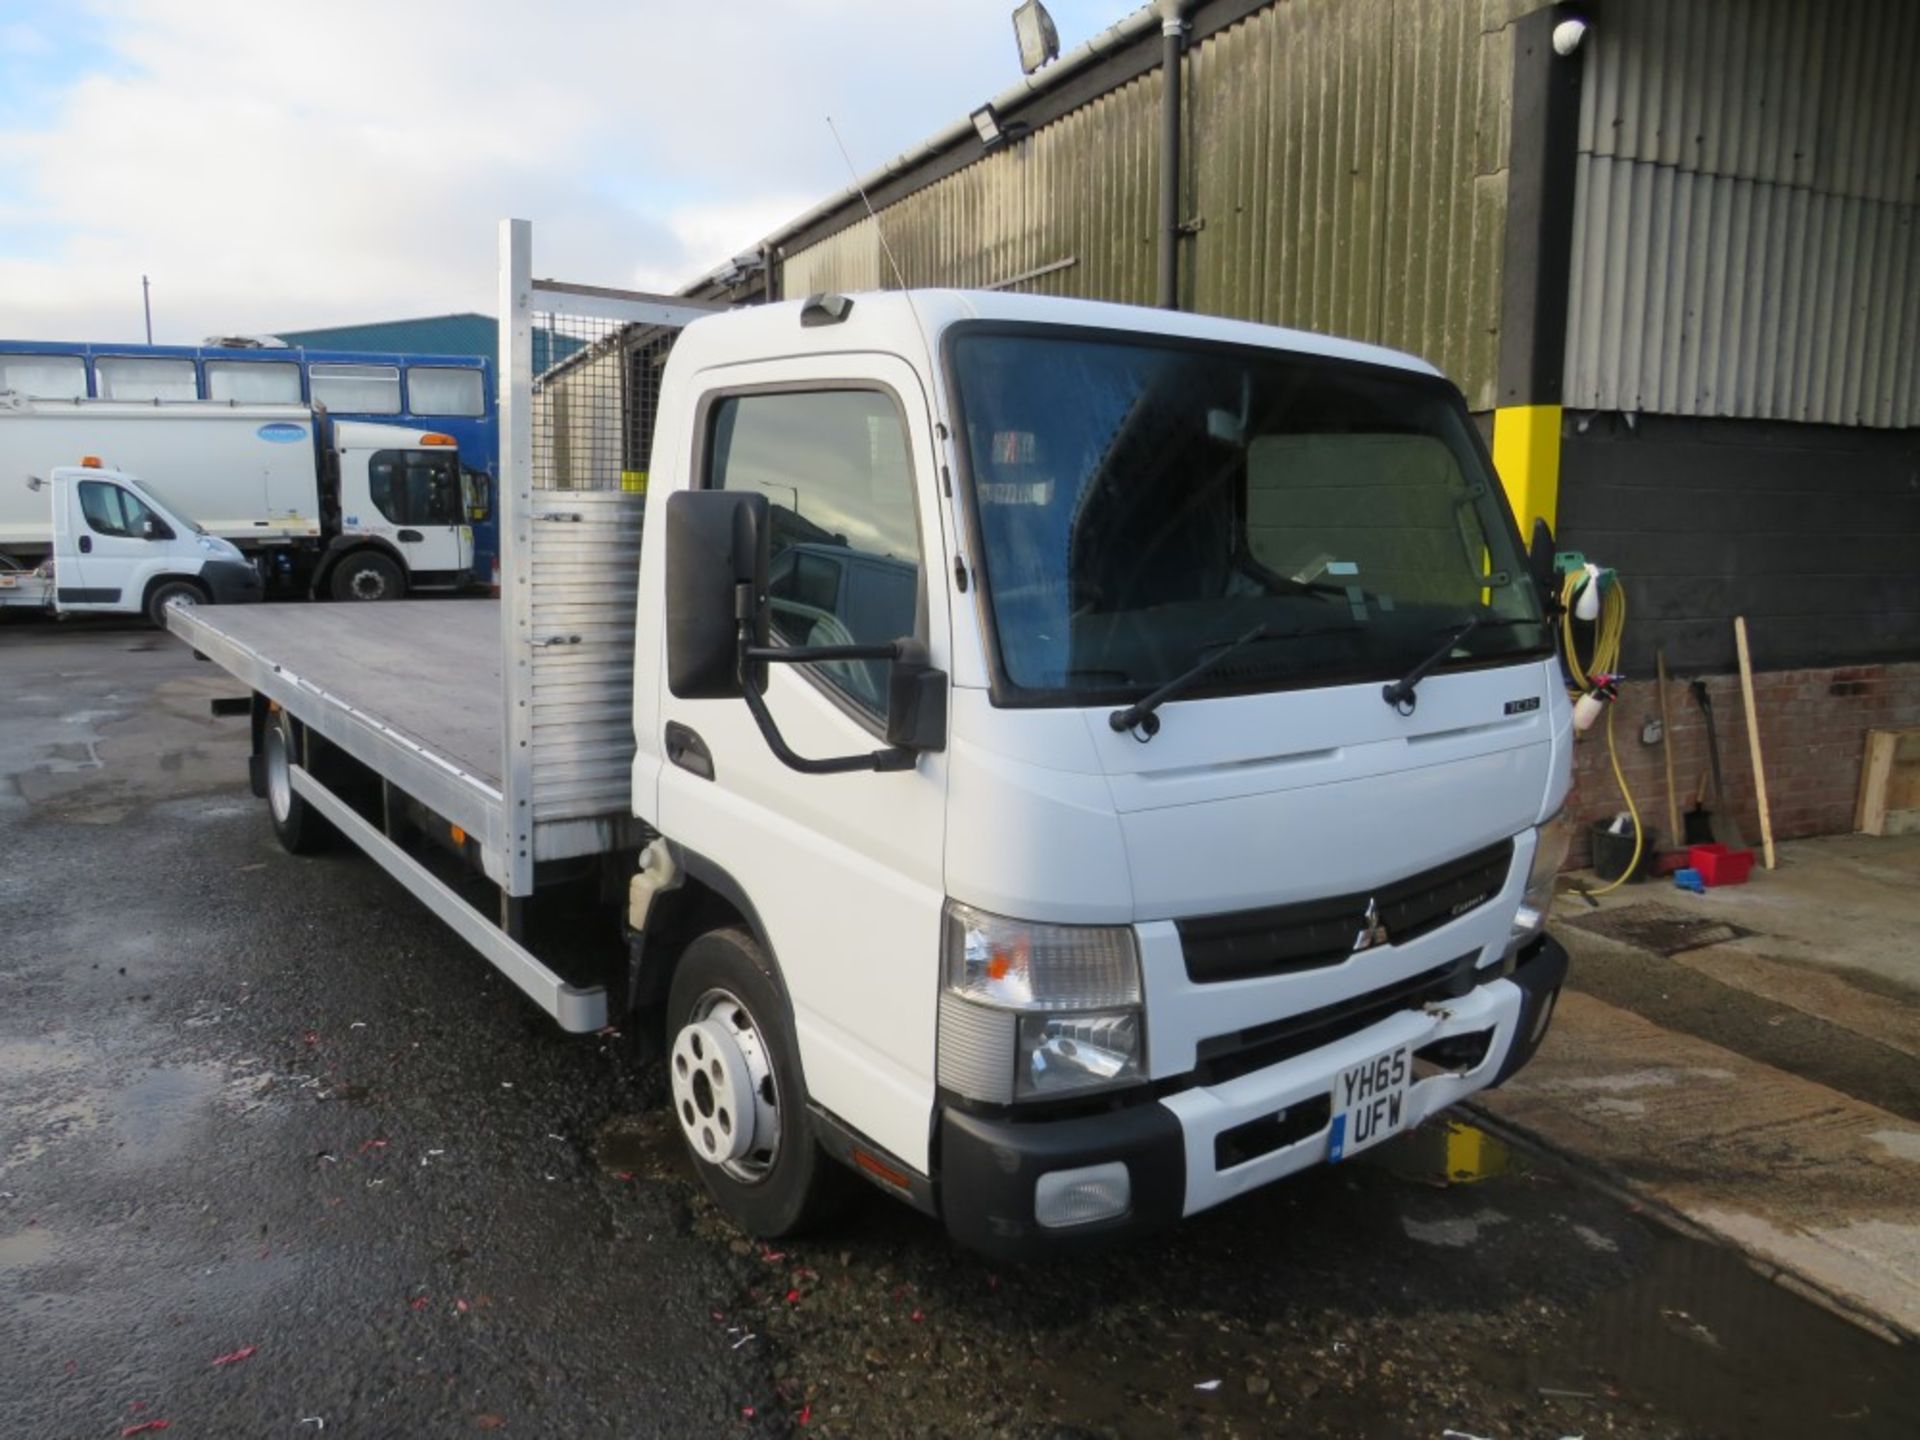 65 reg MITSUBISHI FUSO CANTER 7C15 43 FLAT BED, 1ST REG 09/15, 123010M, V5 HERE, 1 OWNER FROM NEW [